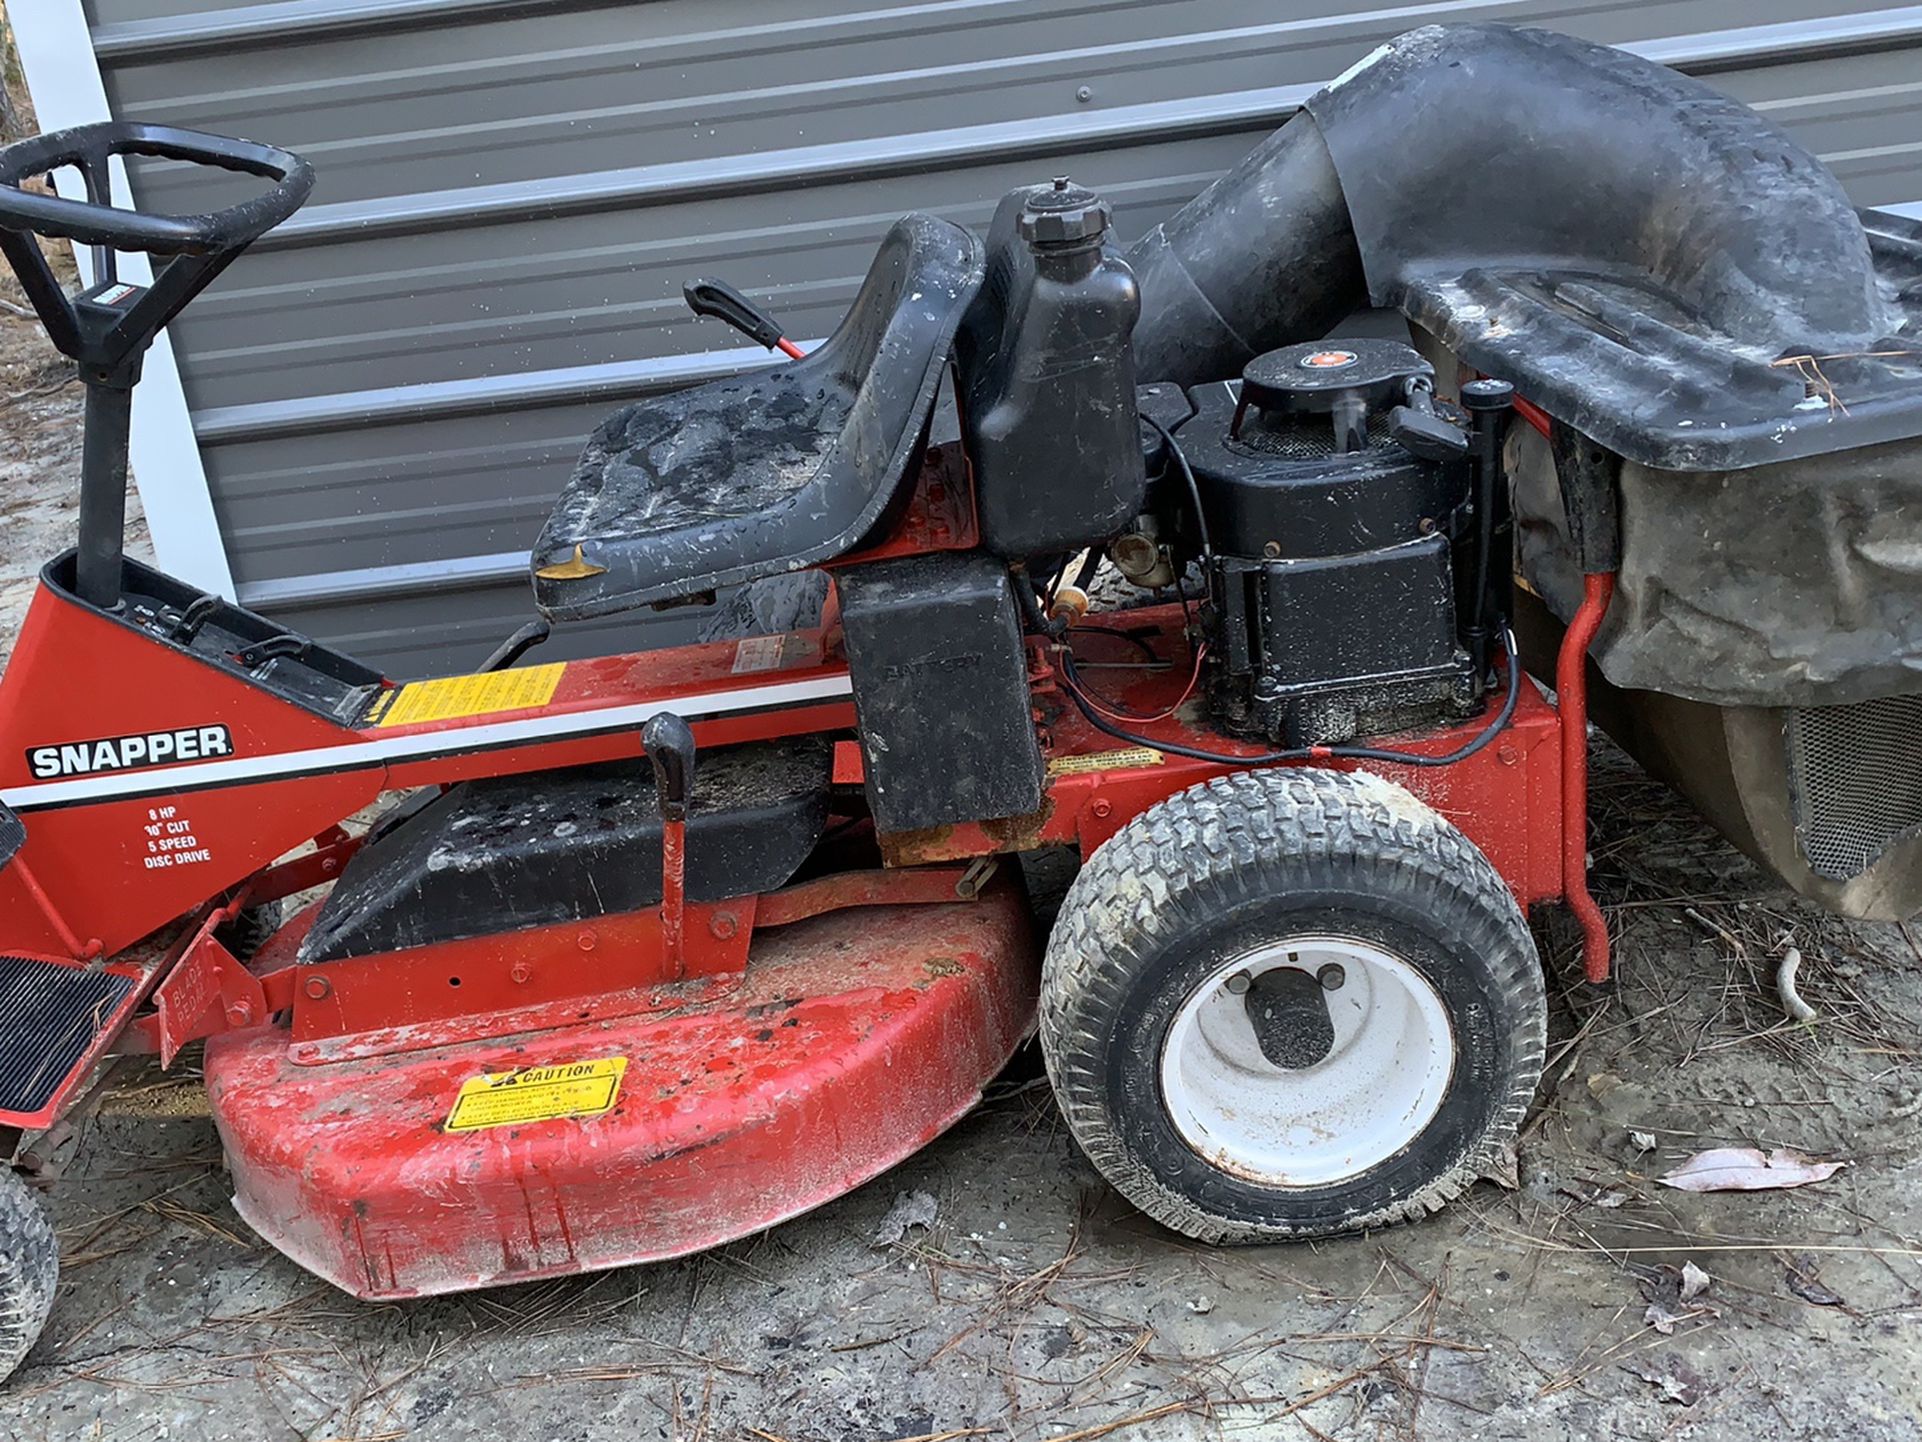 Snapper Hi-vac Lawn Mower Tractor And Parts Mower